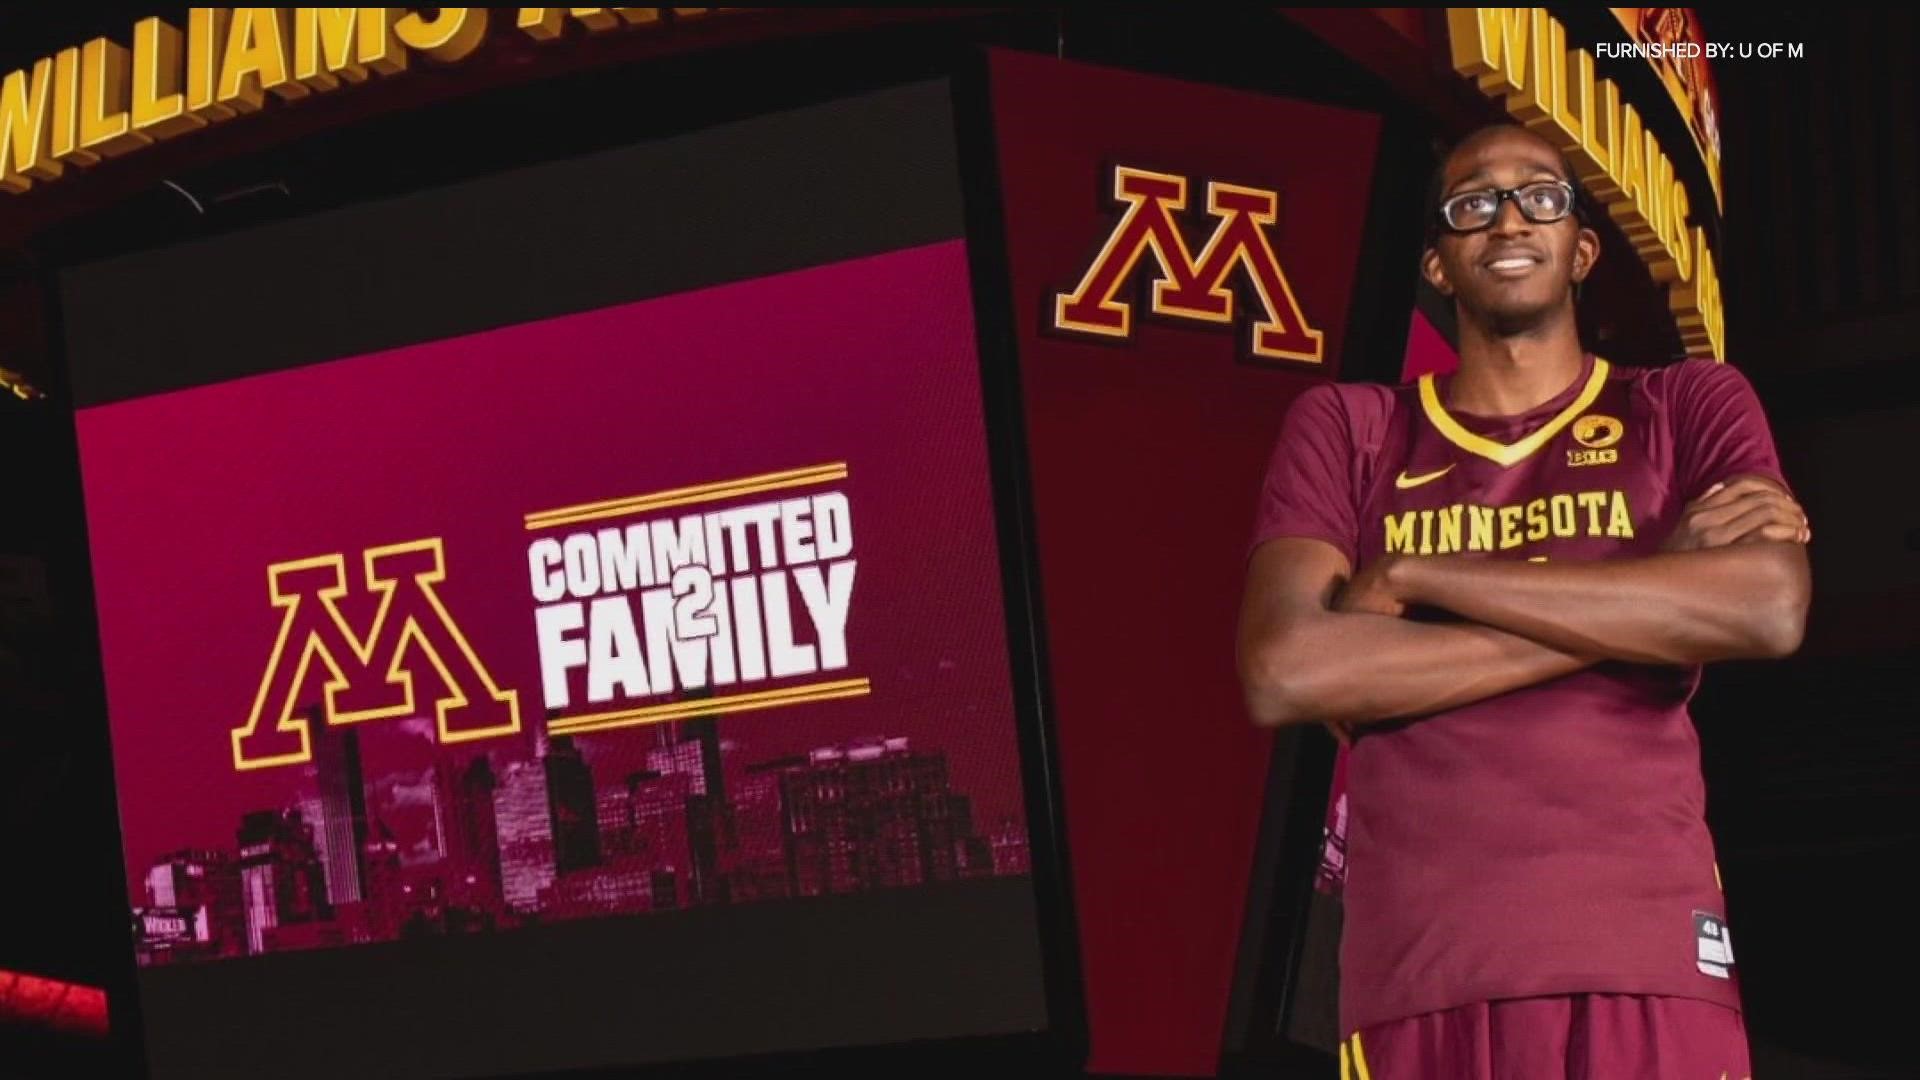 Dennis Evans verbally committed to the University of Minnesota on Monday, making him one of the highest-rated recruits to join the Gophers since Kris Humphries.